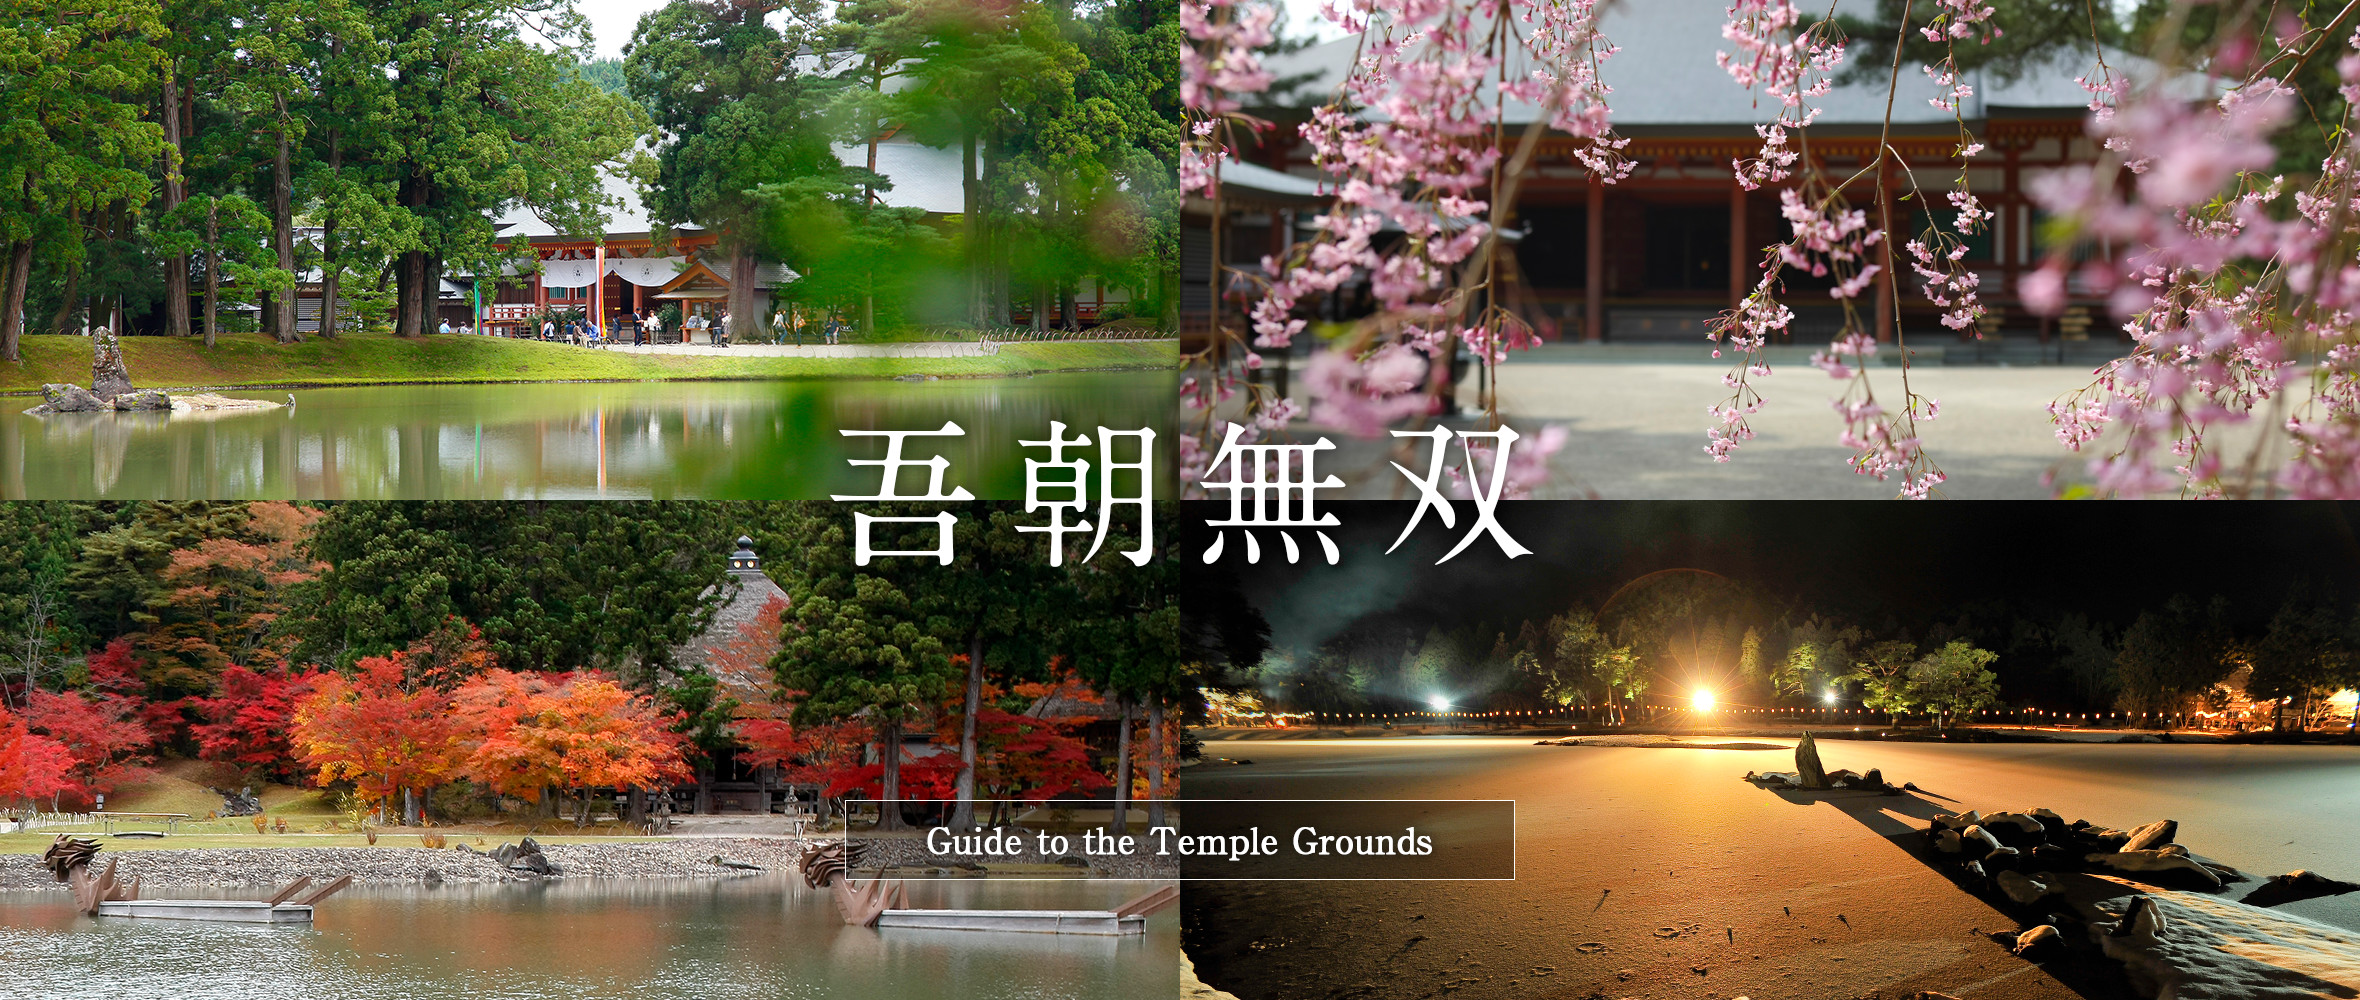 Guide to the Temple Grounds